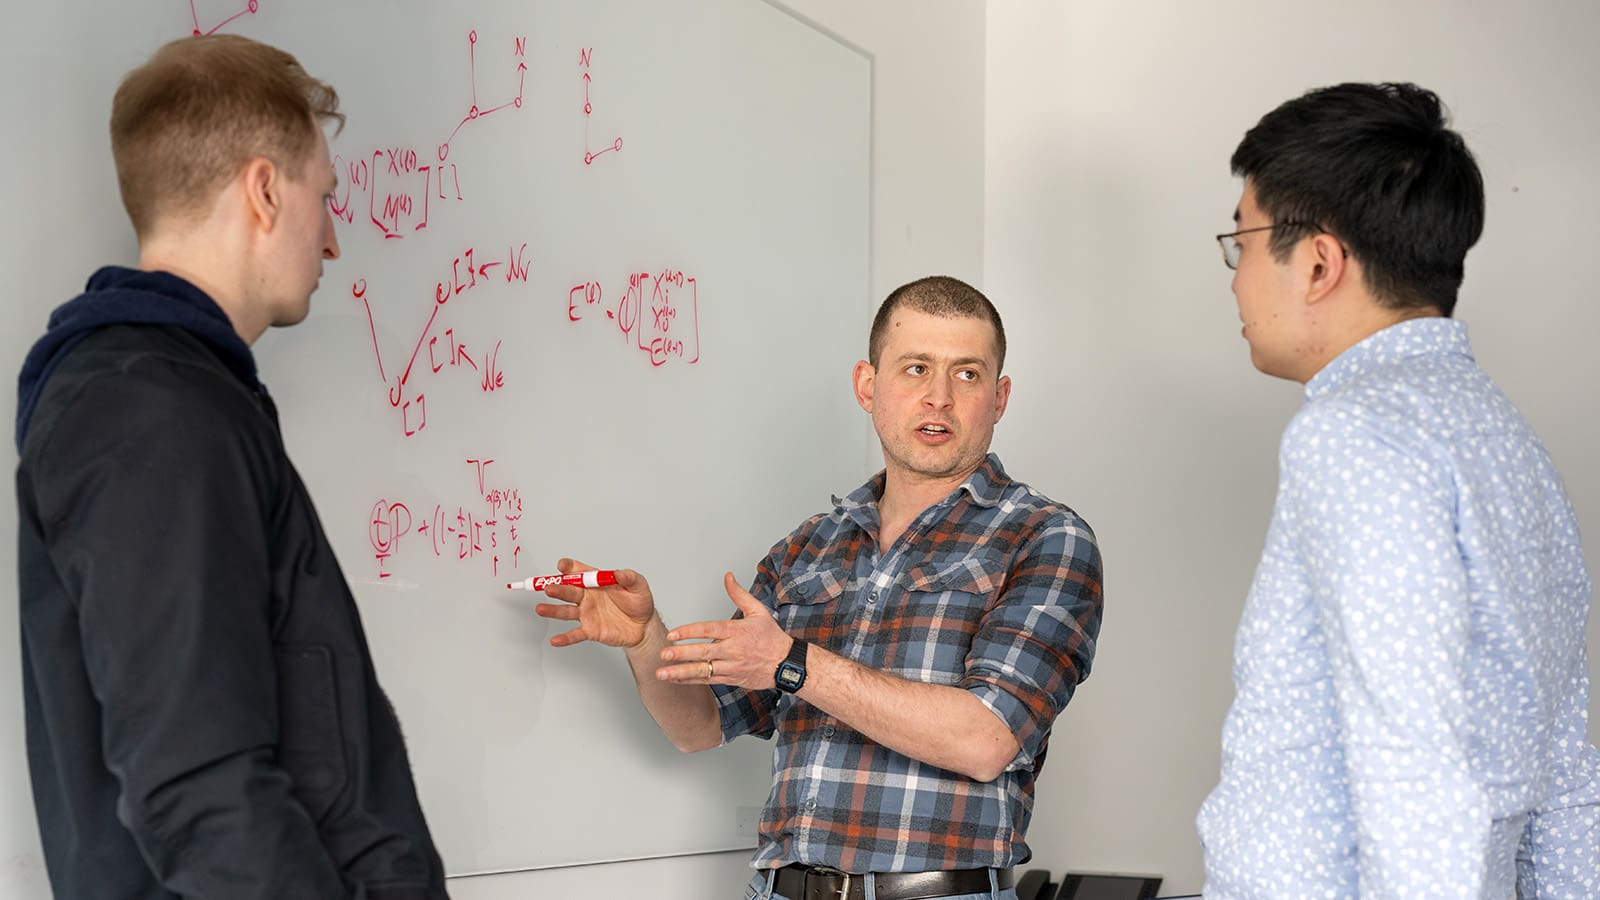 Three researchers stand in front of a white board discussing mathematics written on the board.